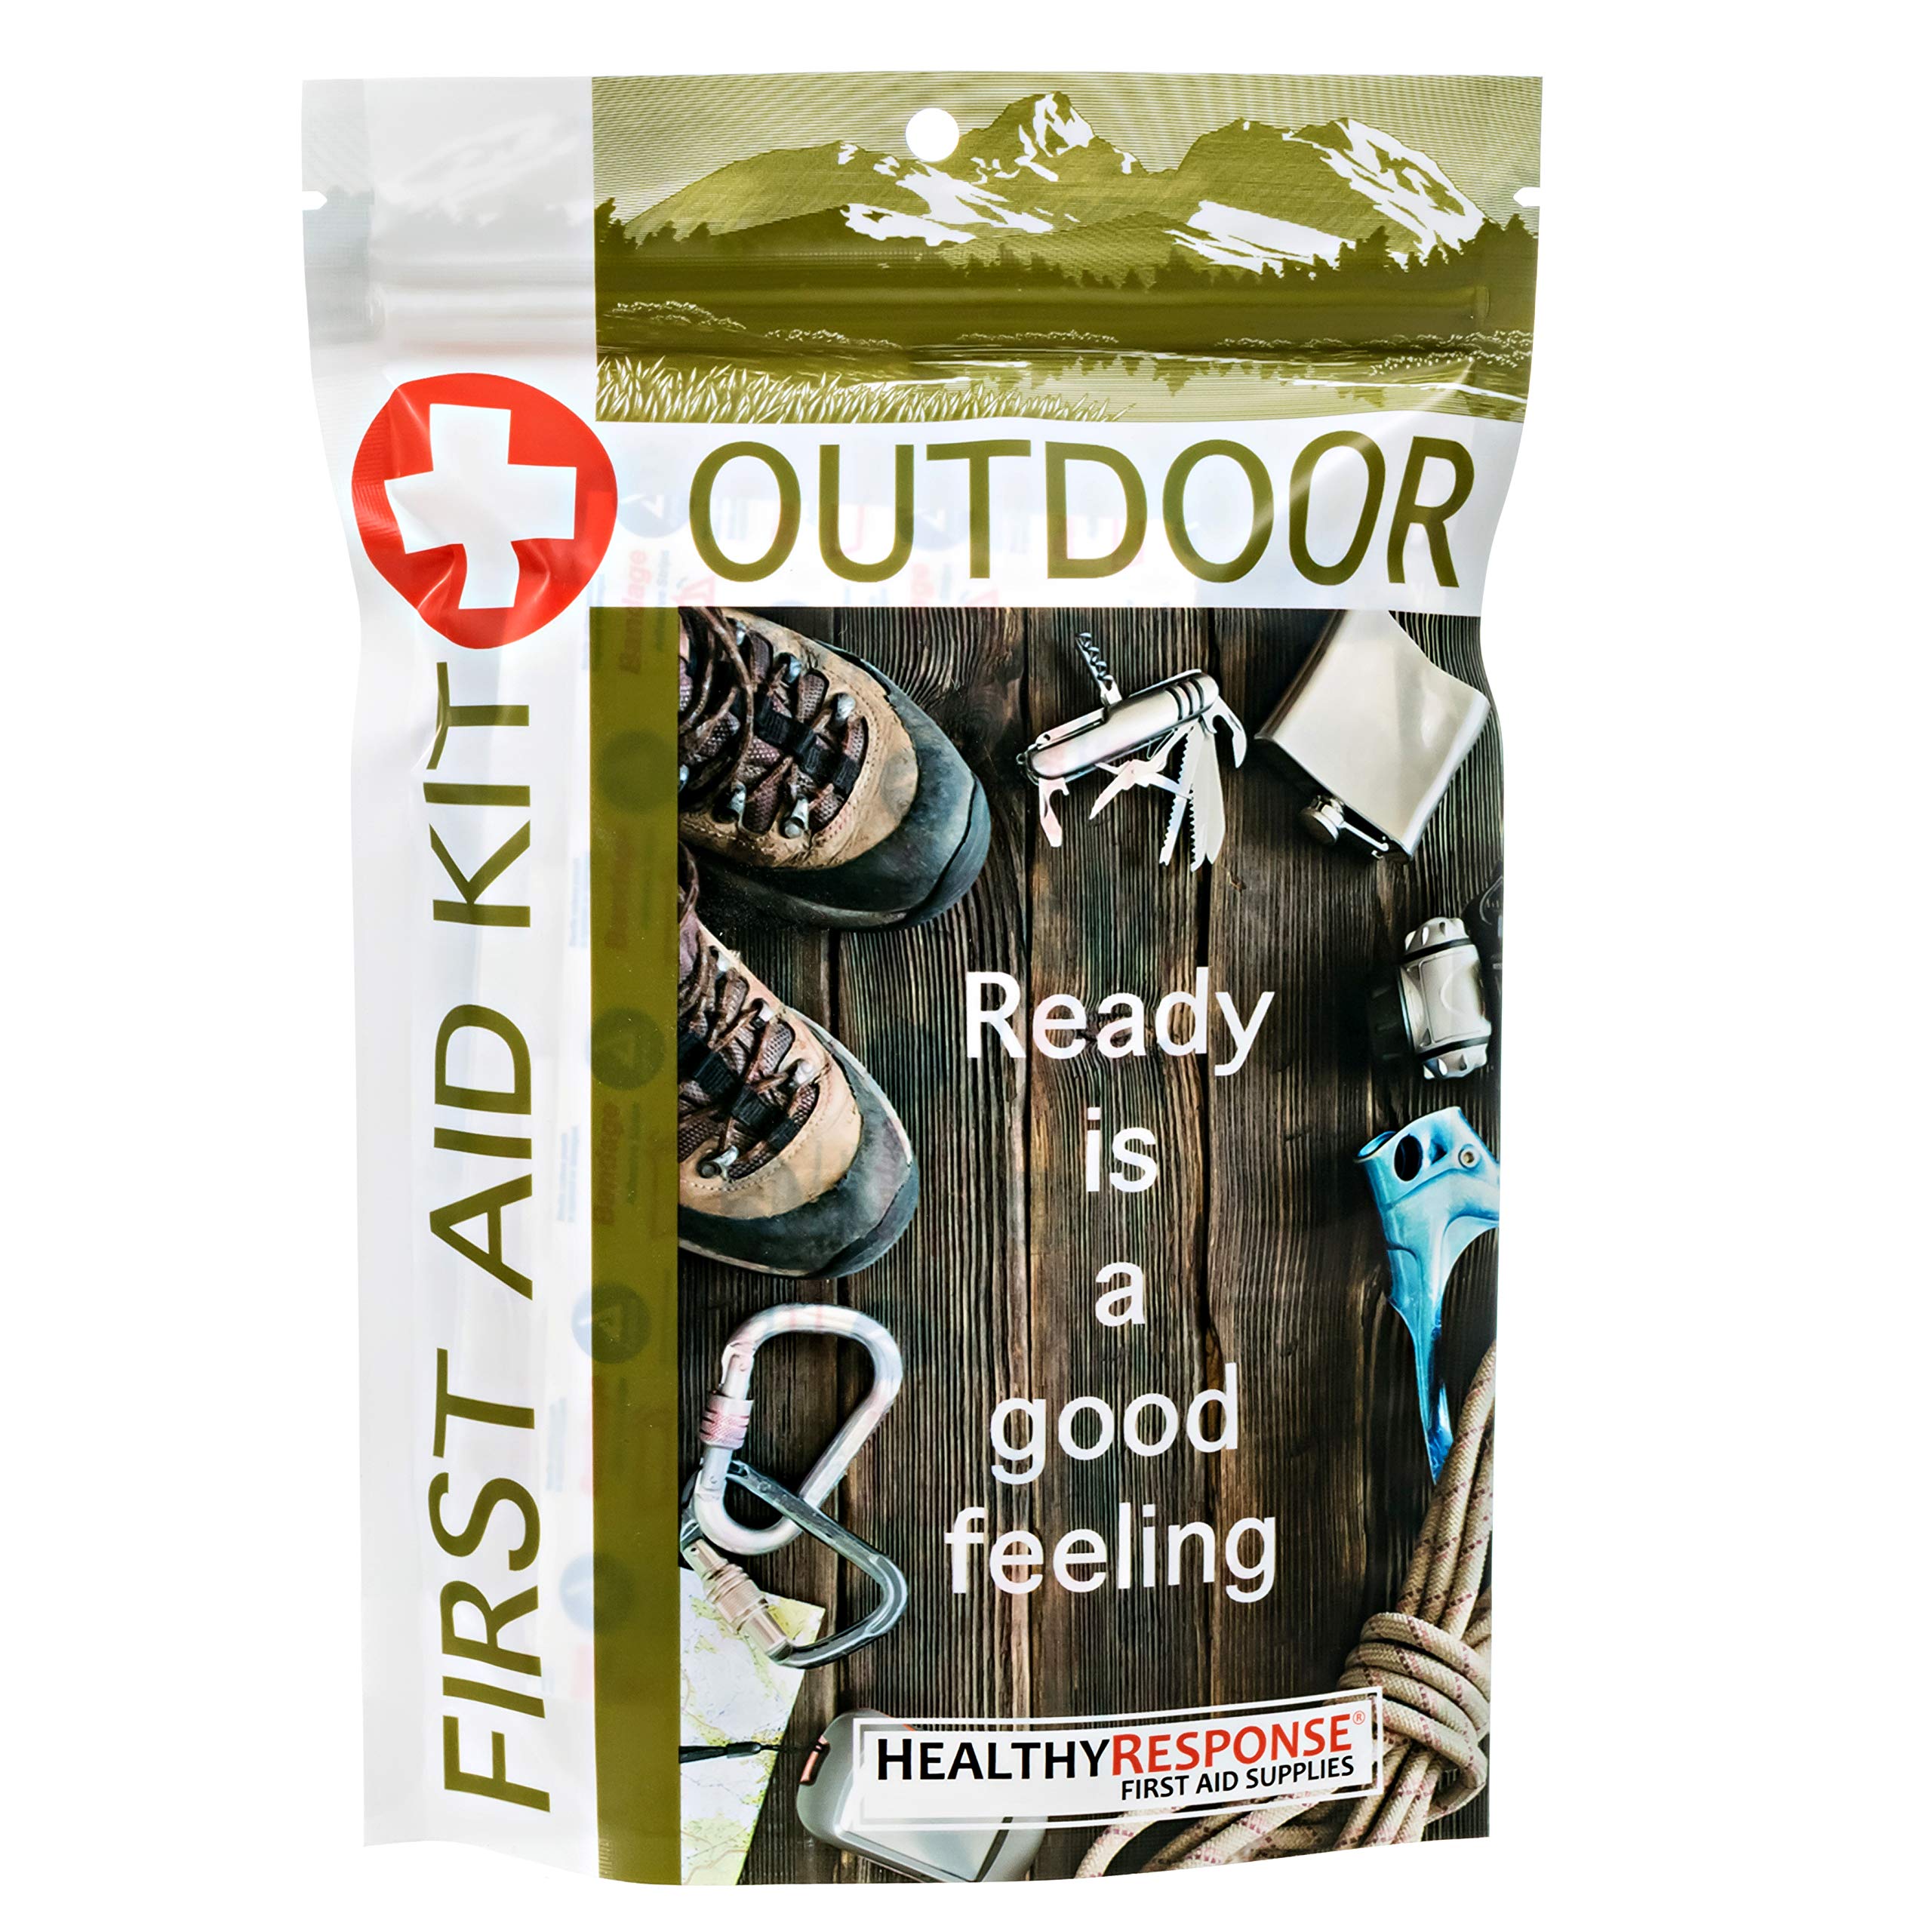 Healthy Response Outdoor First Aid Kit - Waterproof, Ultralight